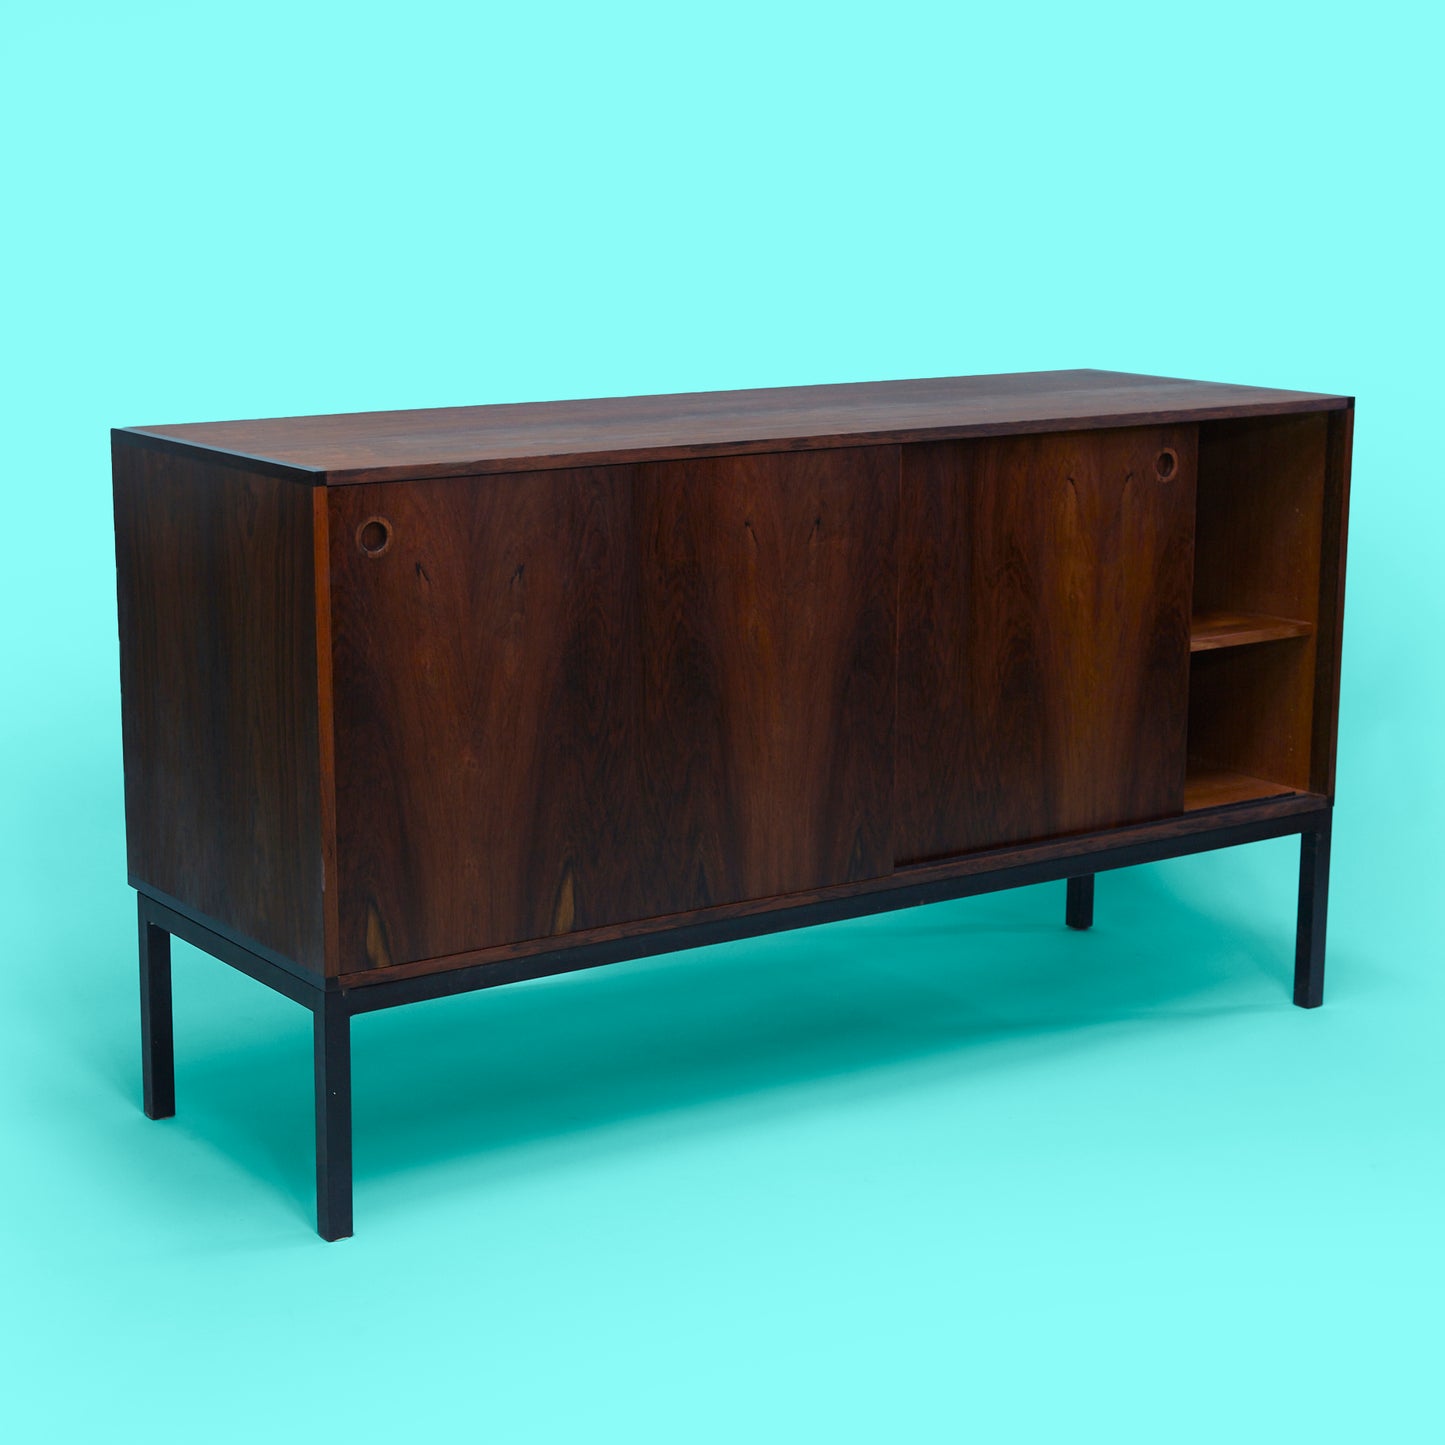 Midcentury Danish Modern Credenza or Cabinet in Rosewood with Black Legs